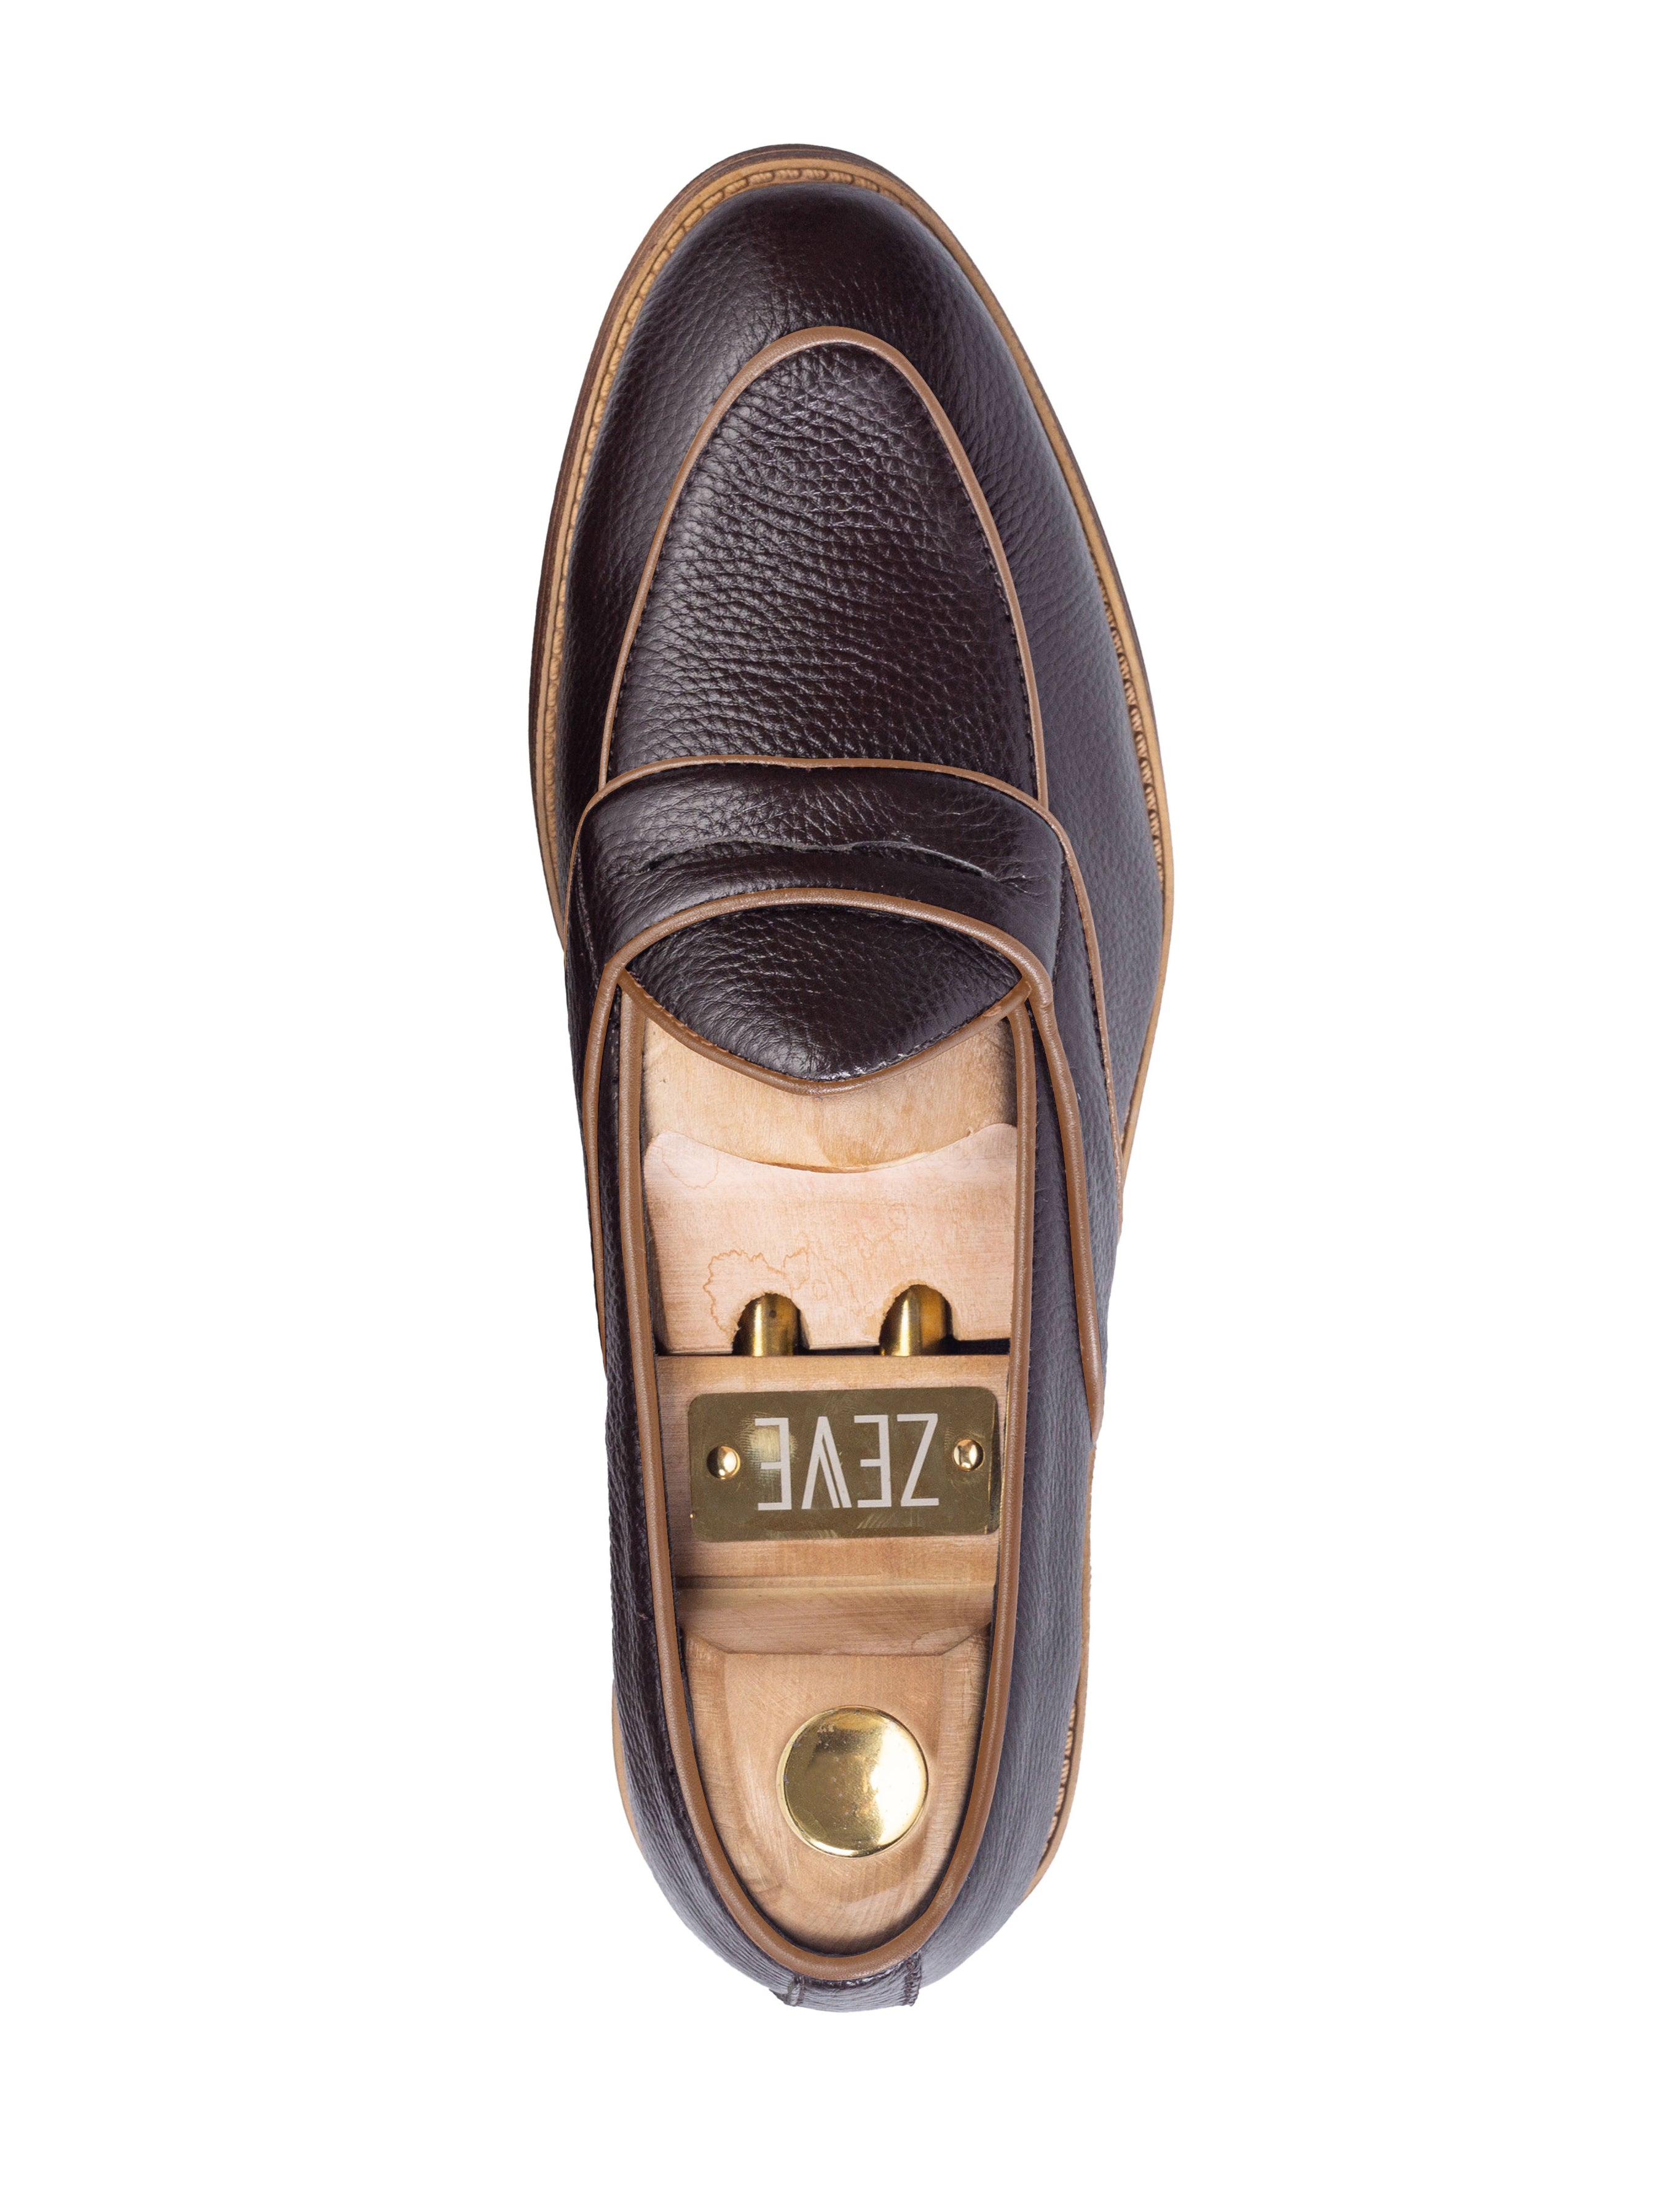 Belgian Loafer with Penny - Coffee Pebble Grain Leather (Flexi-Sole)